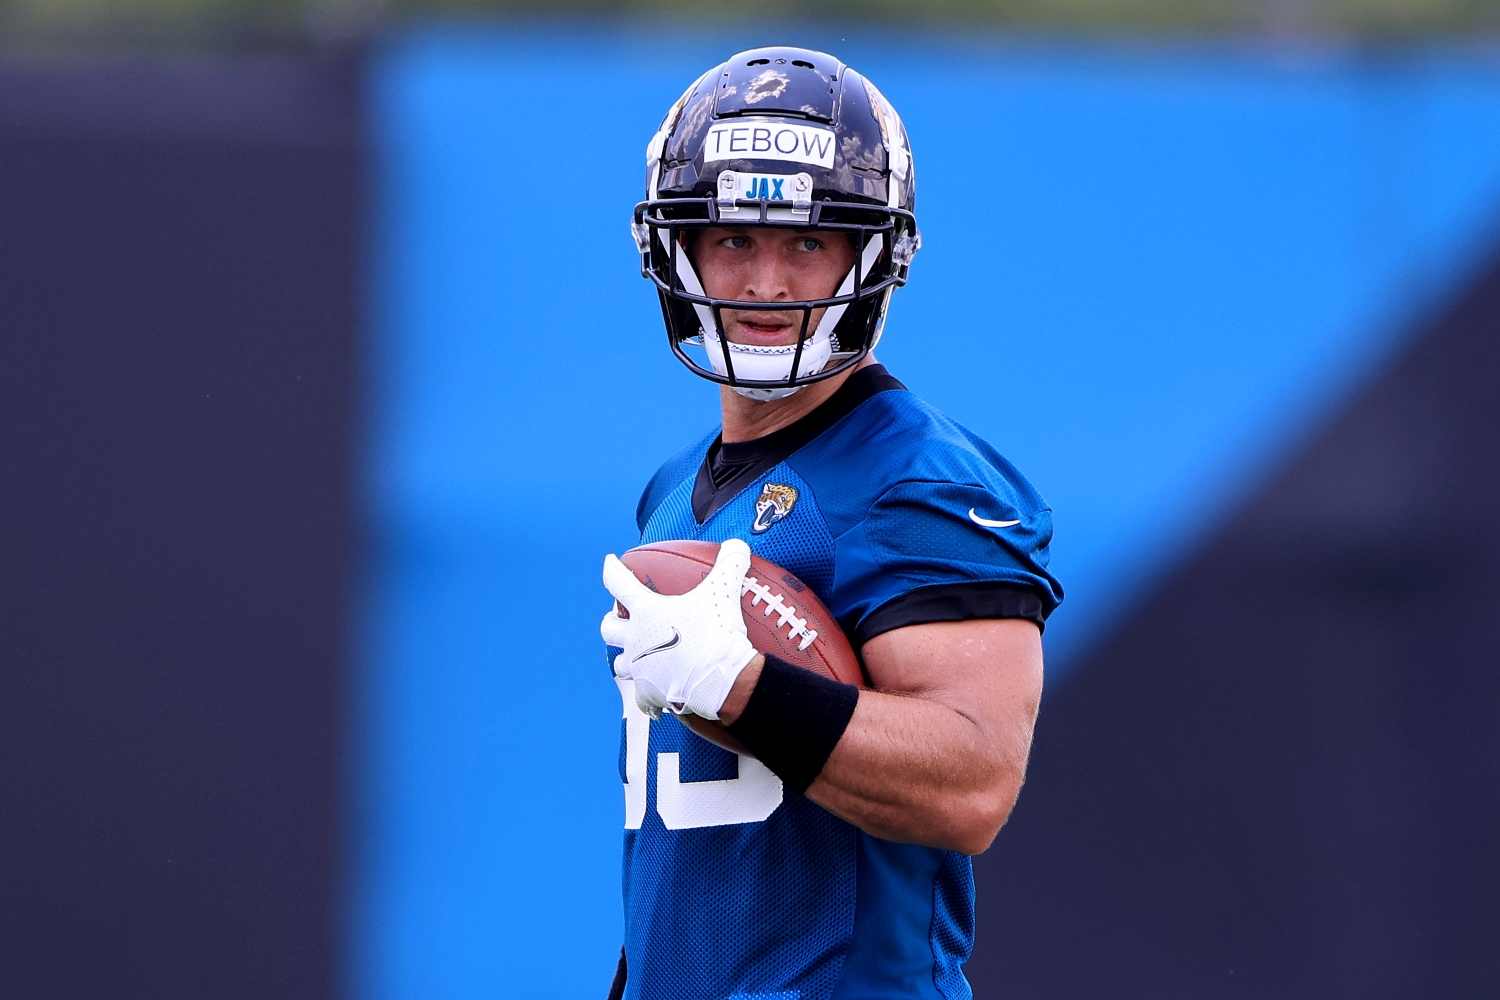 Jacksonville Jaguars tight end Tim Tebow holds a ball during practice.